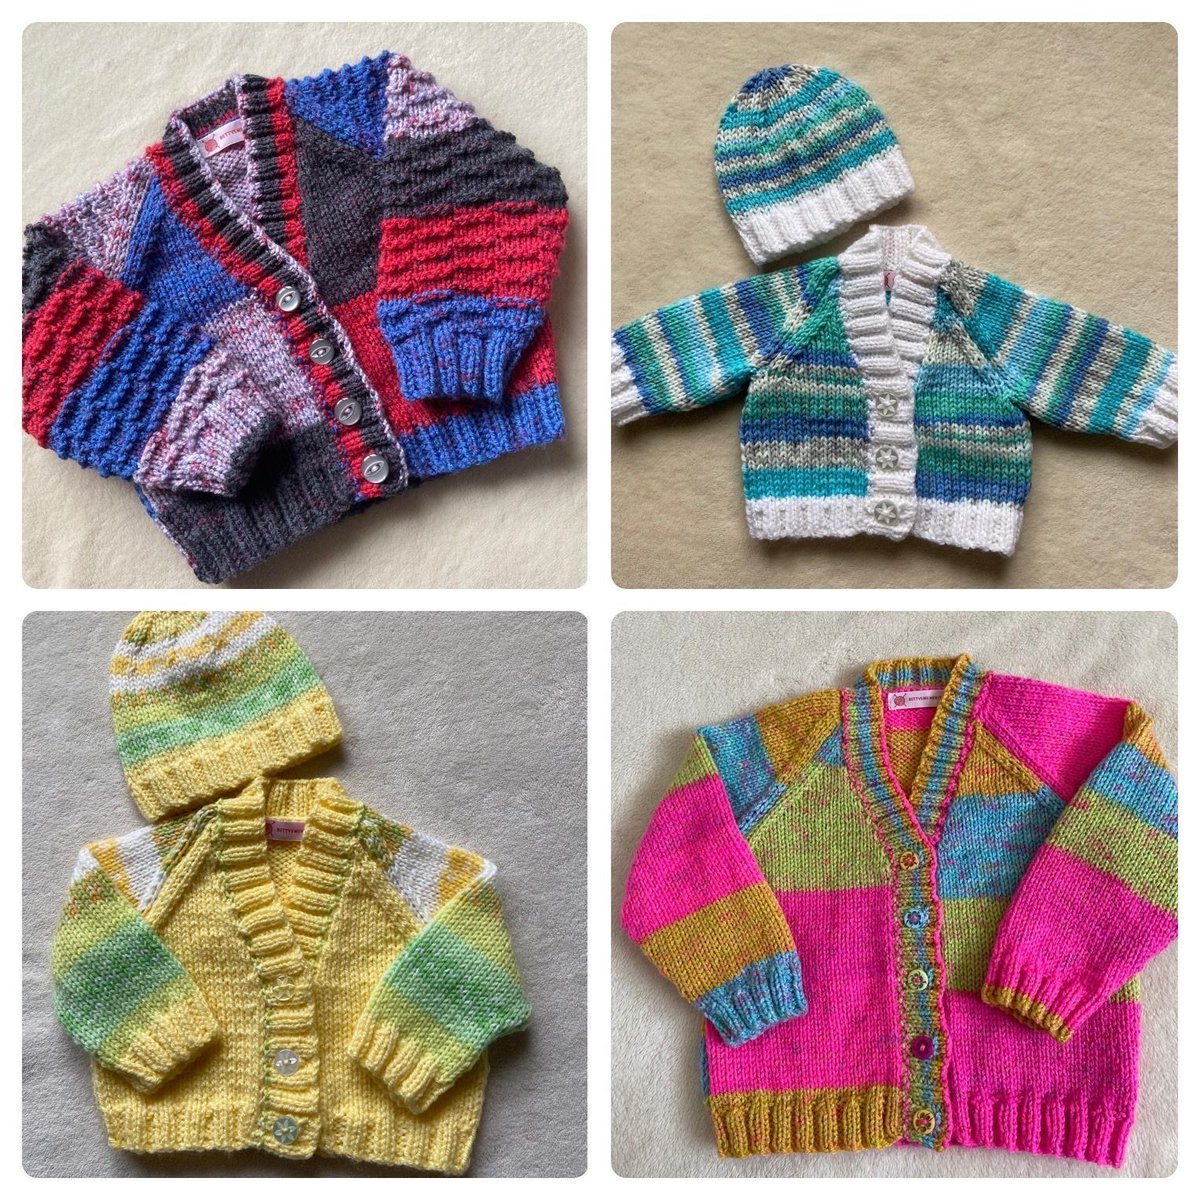 Fun colourful hand knit baby cardigans in sizes from premature to 12 months 🌈🧶 all available in my Etsy shop. Bettysmumknits.etsy.com #shopsmall #etsyhandmade #mhhsbd